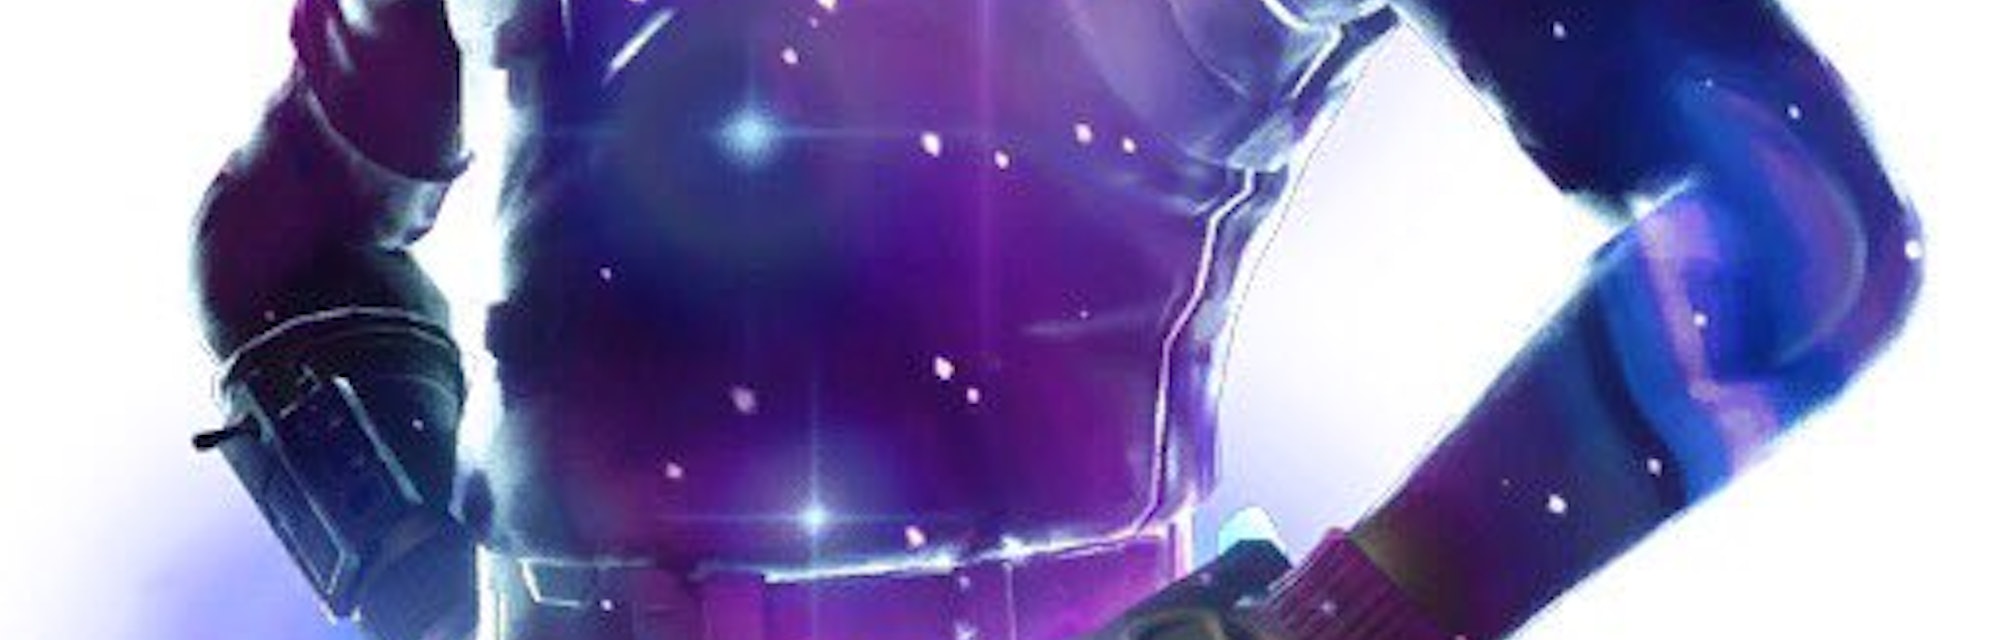 Fortnite Leaked Skins Cosmetics Galaxy Skin May Be A Samsung Exclusive